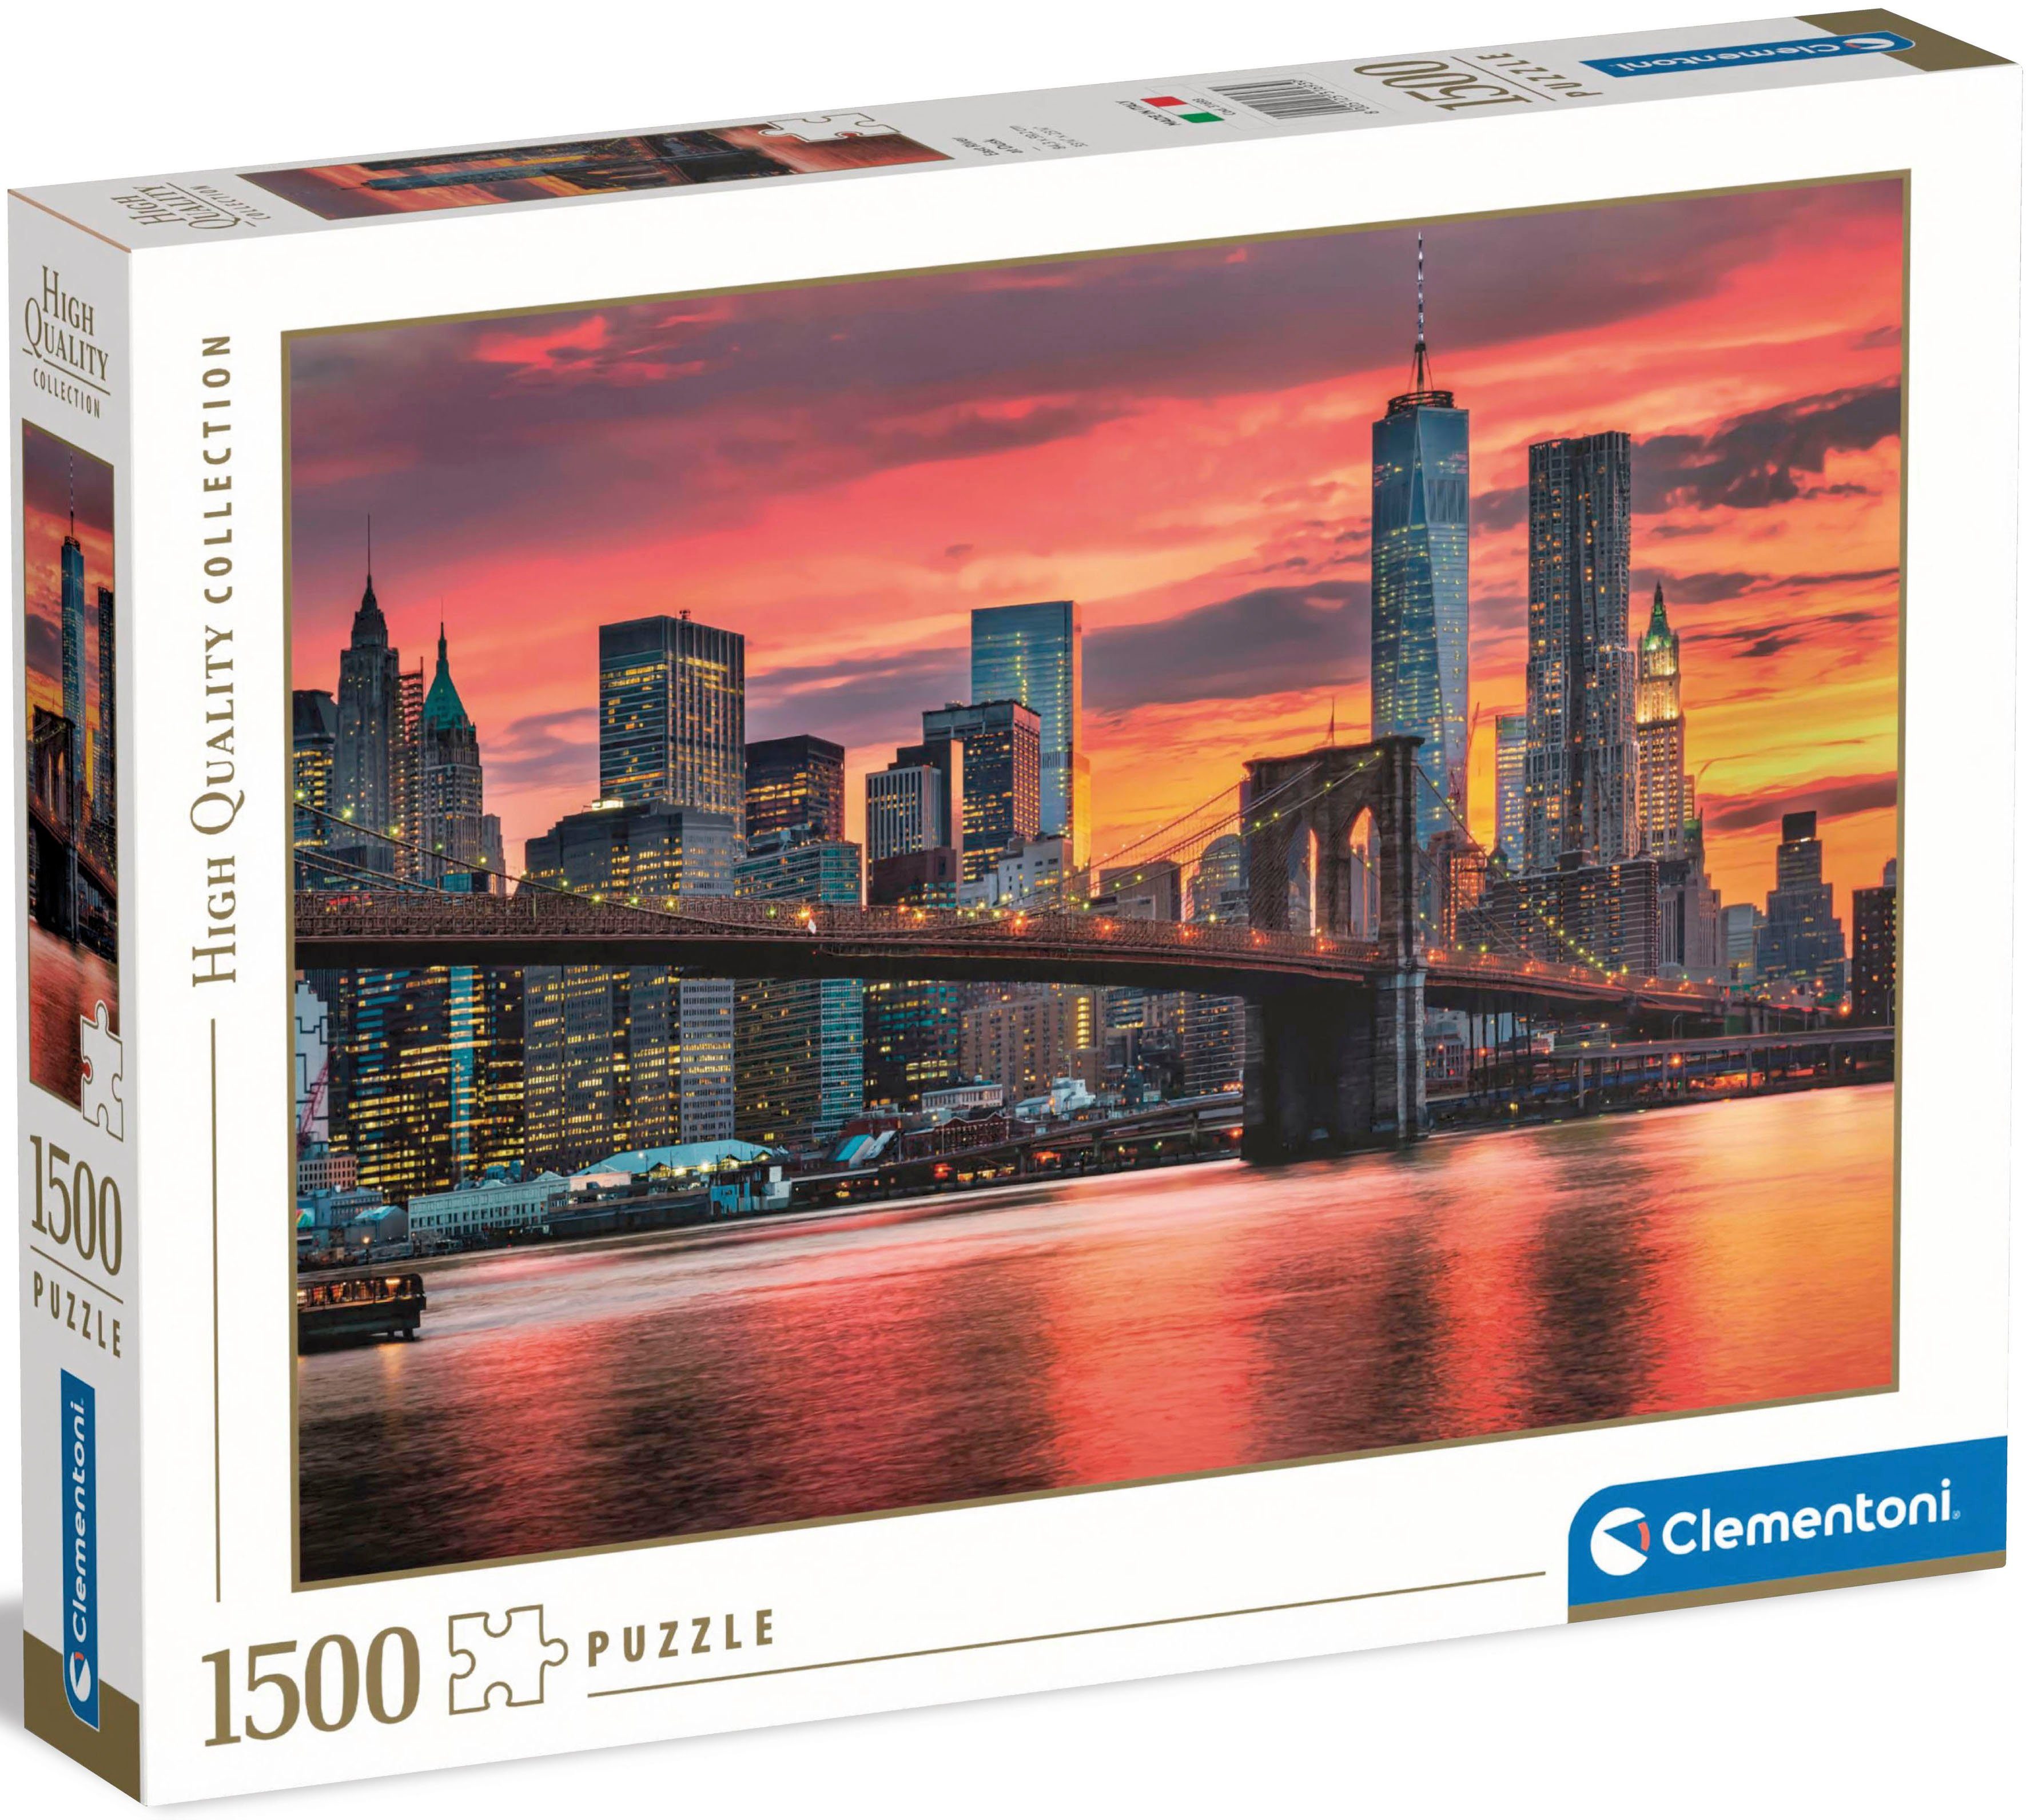 Clementoni® Puzzle High Quality Collection, East River im Morgengrauen, 1500 Puzzleteile, Made in Europe; FSC® - schützt Wald - weltweit | Puzzle